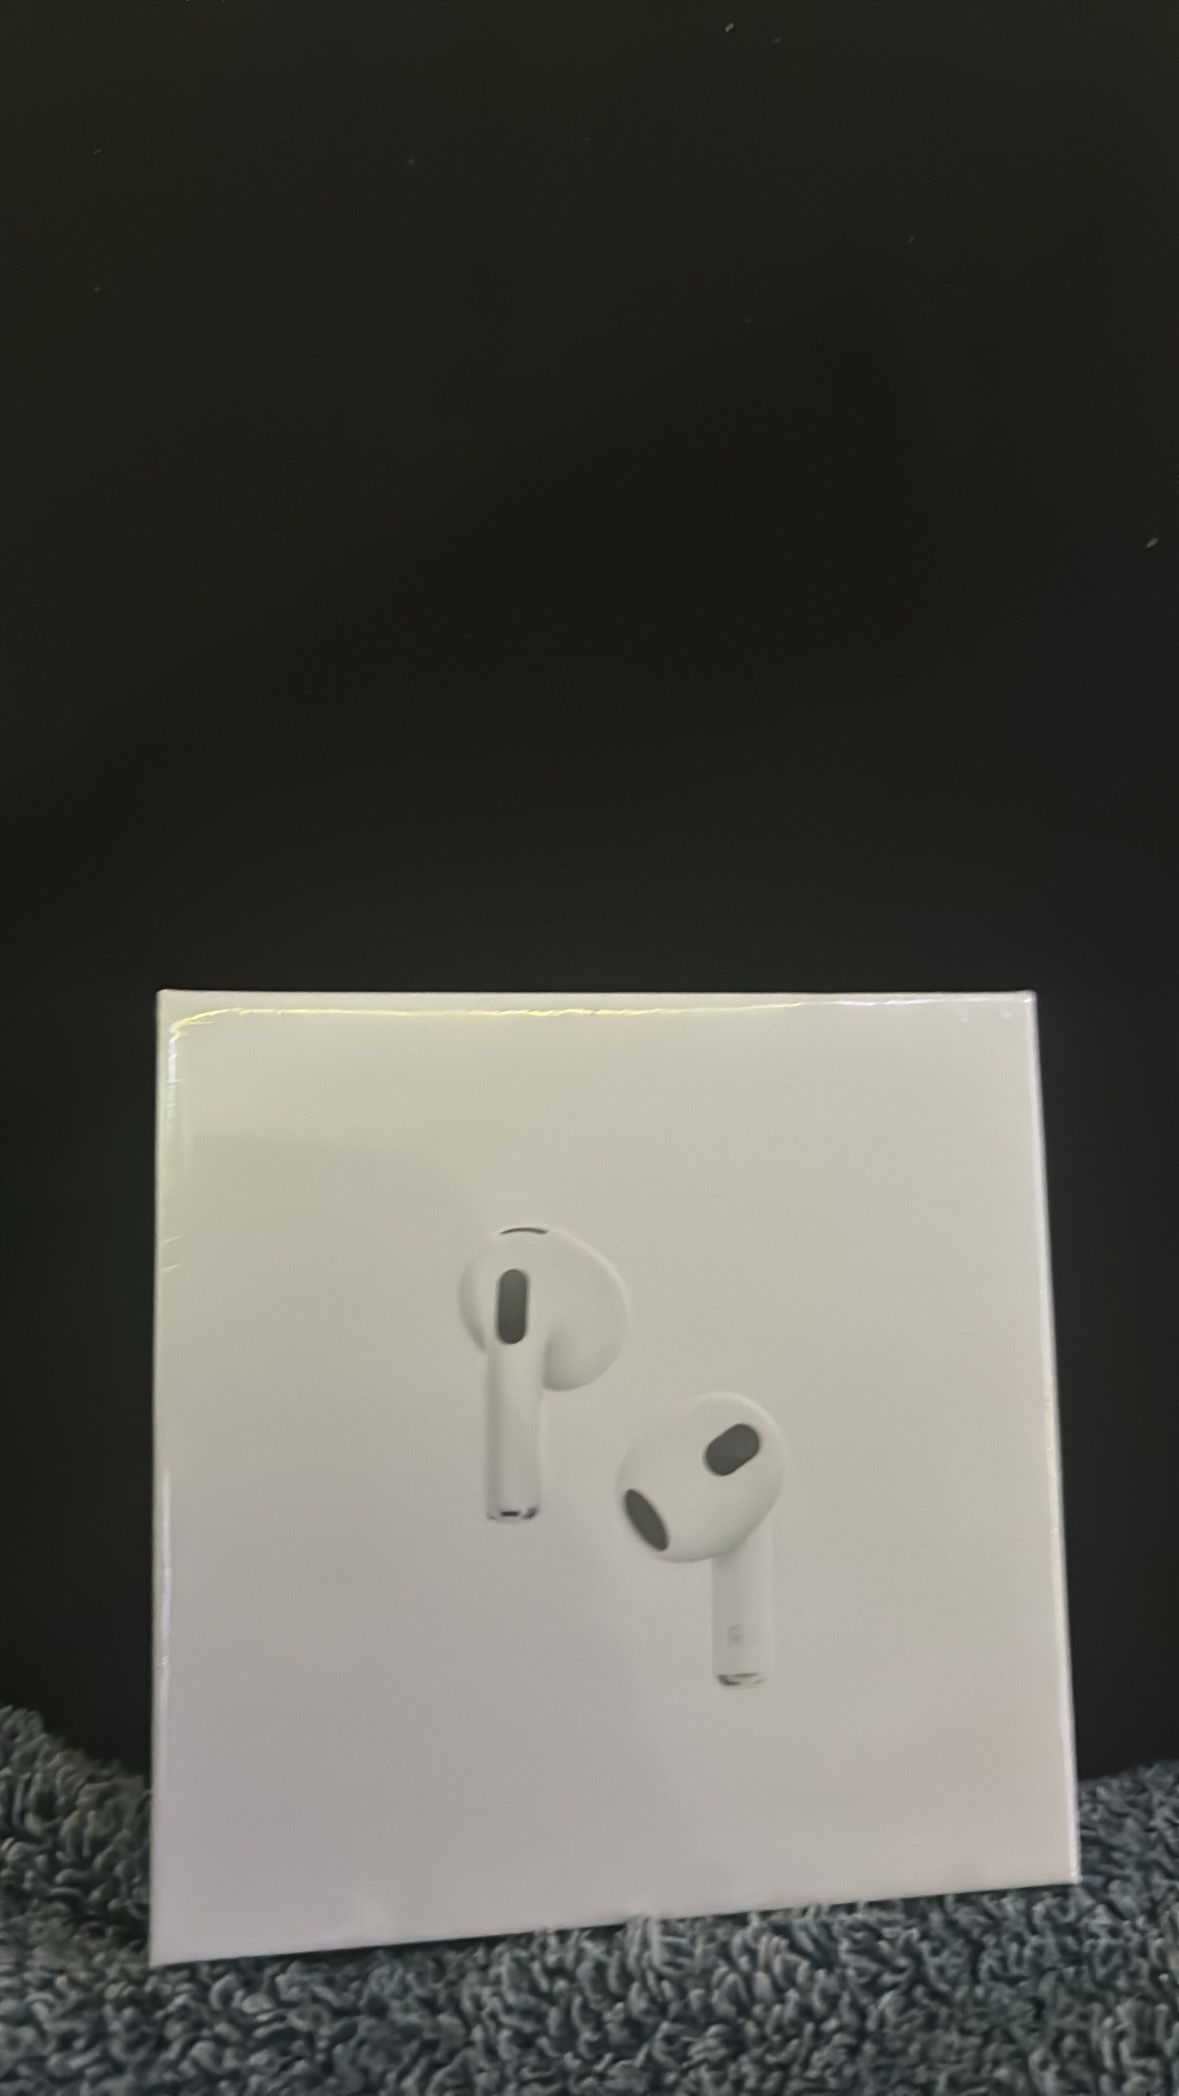 airpods for sale 